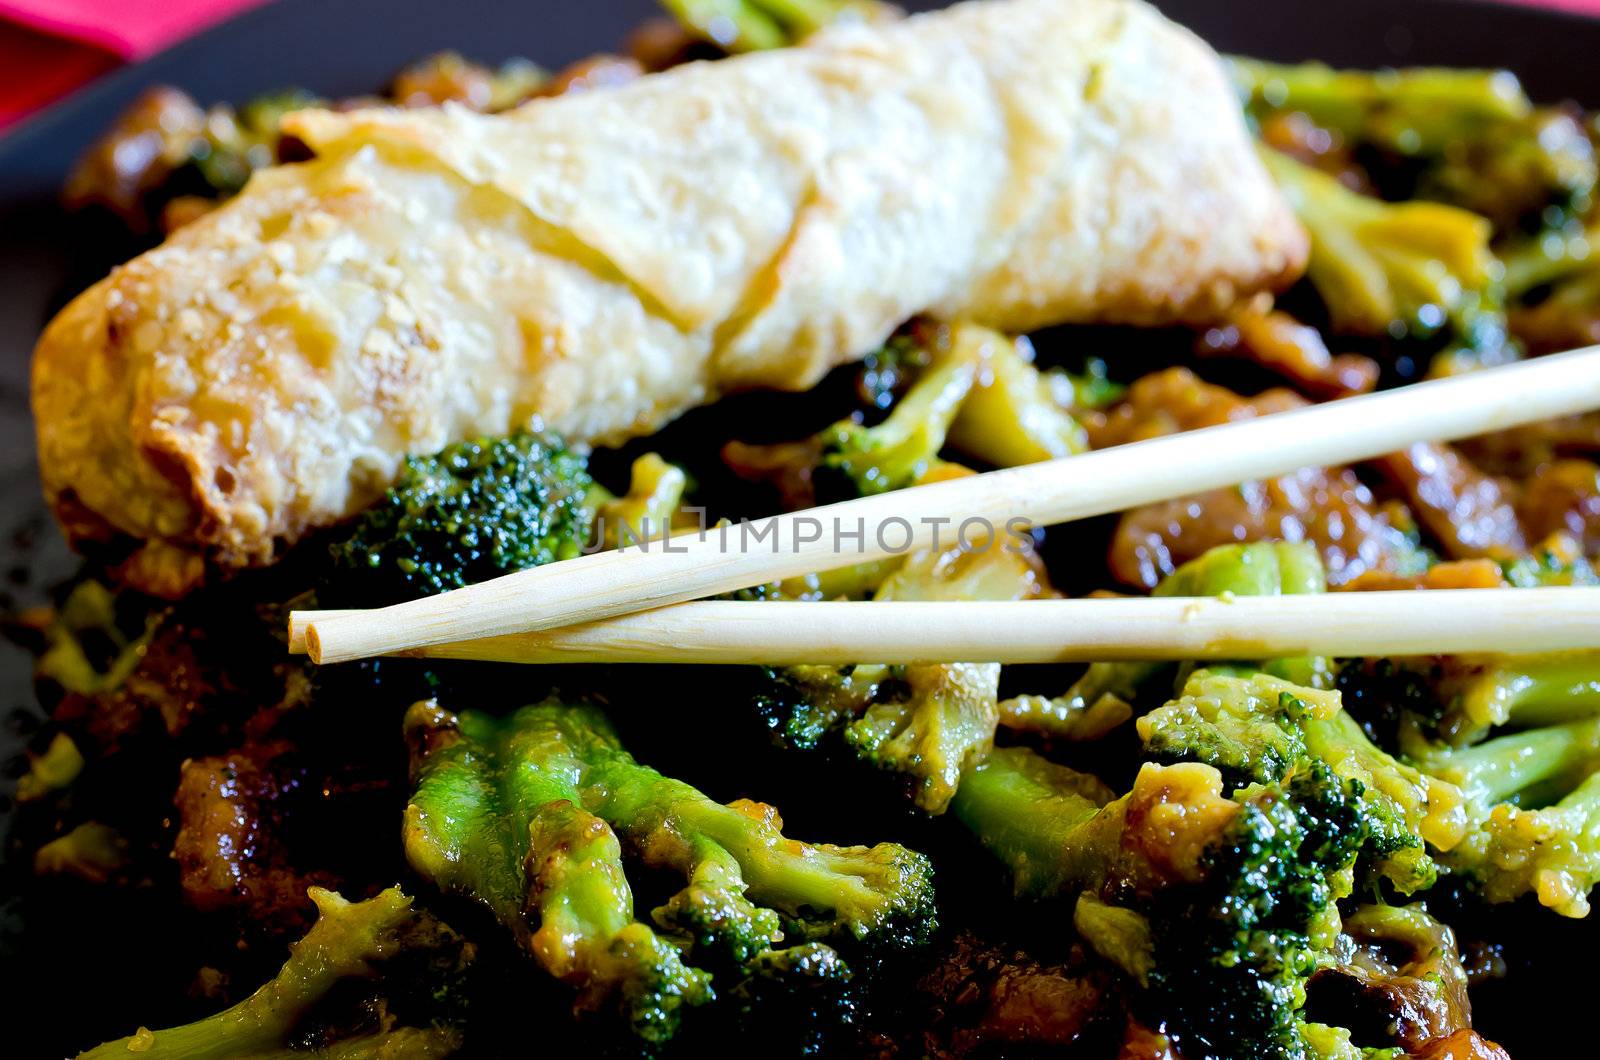 Beef with broccoli with spring roll and chop sticks.